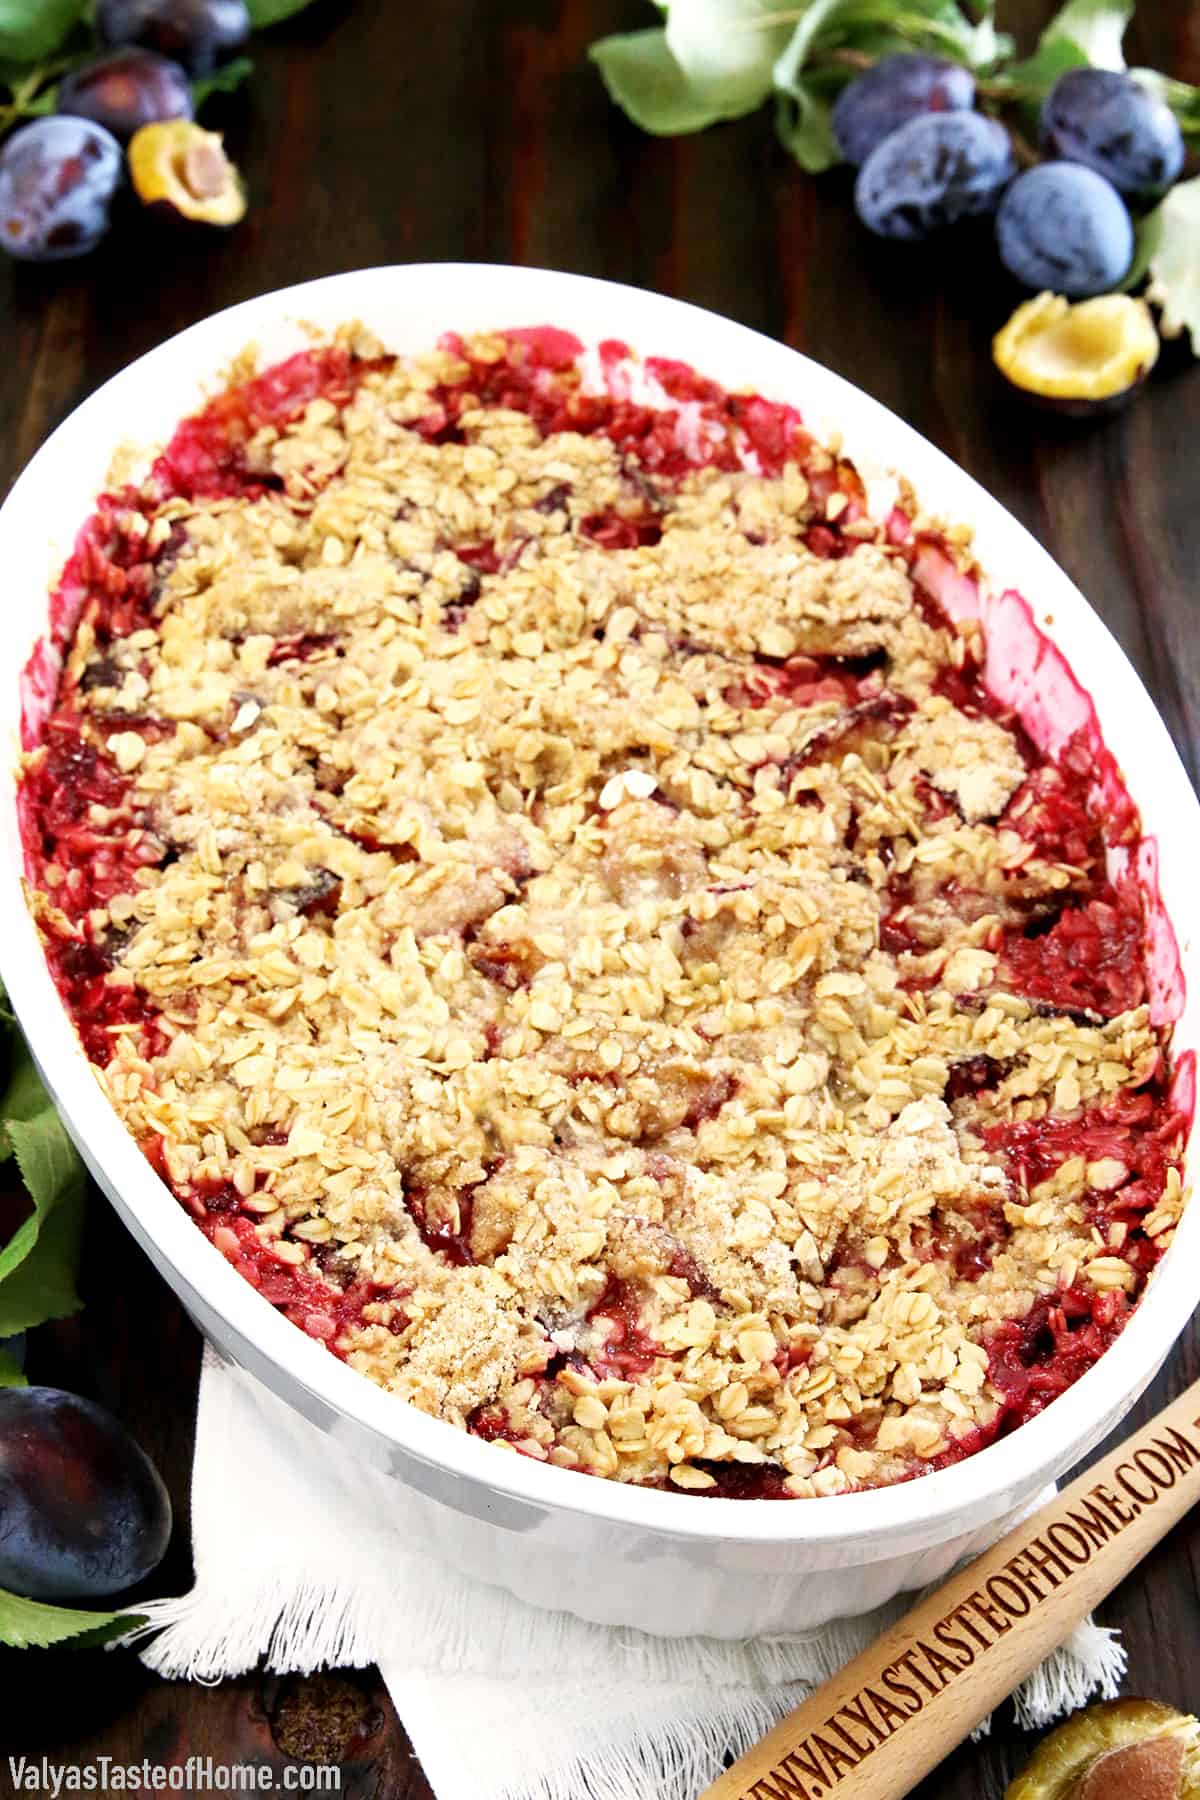 If your plum tree is overloaded with the fruit and you don't know what to do with them, try this recipe out! This is The Best Plum Crisp Recipe you'll ever taste! The crunchy and delicious oats topping is guaranteed to leave you wanting more.